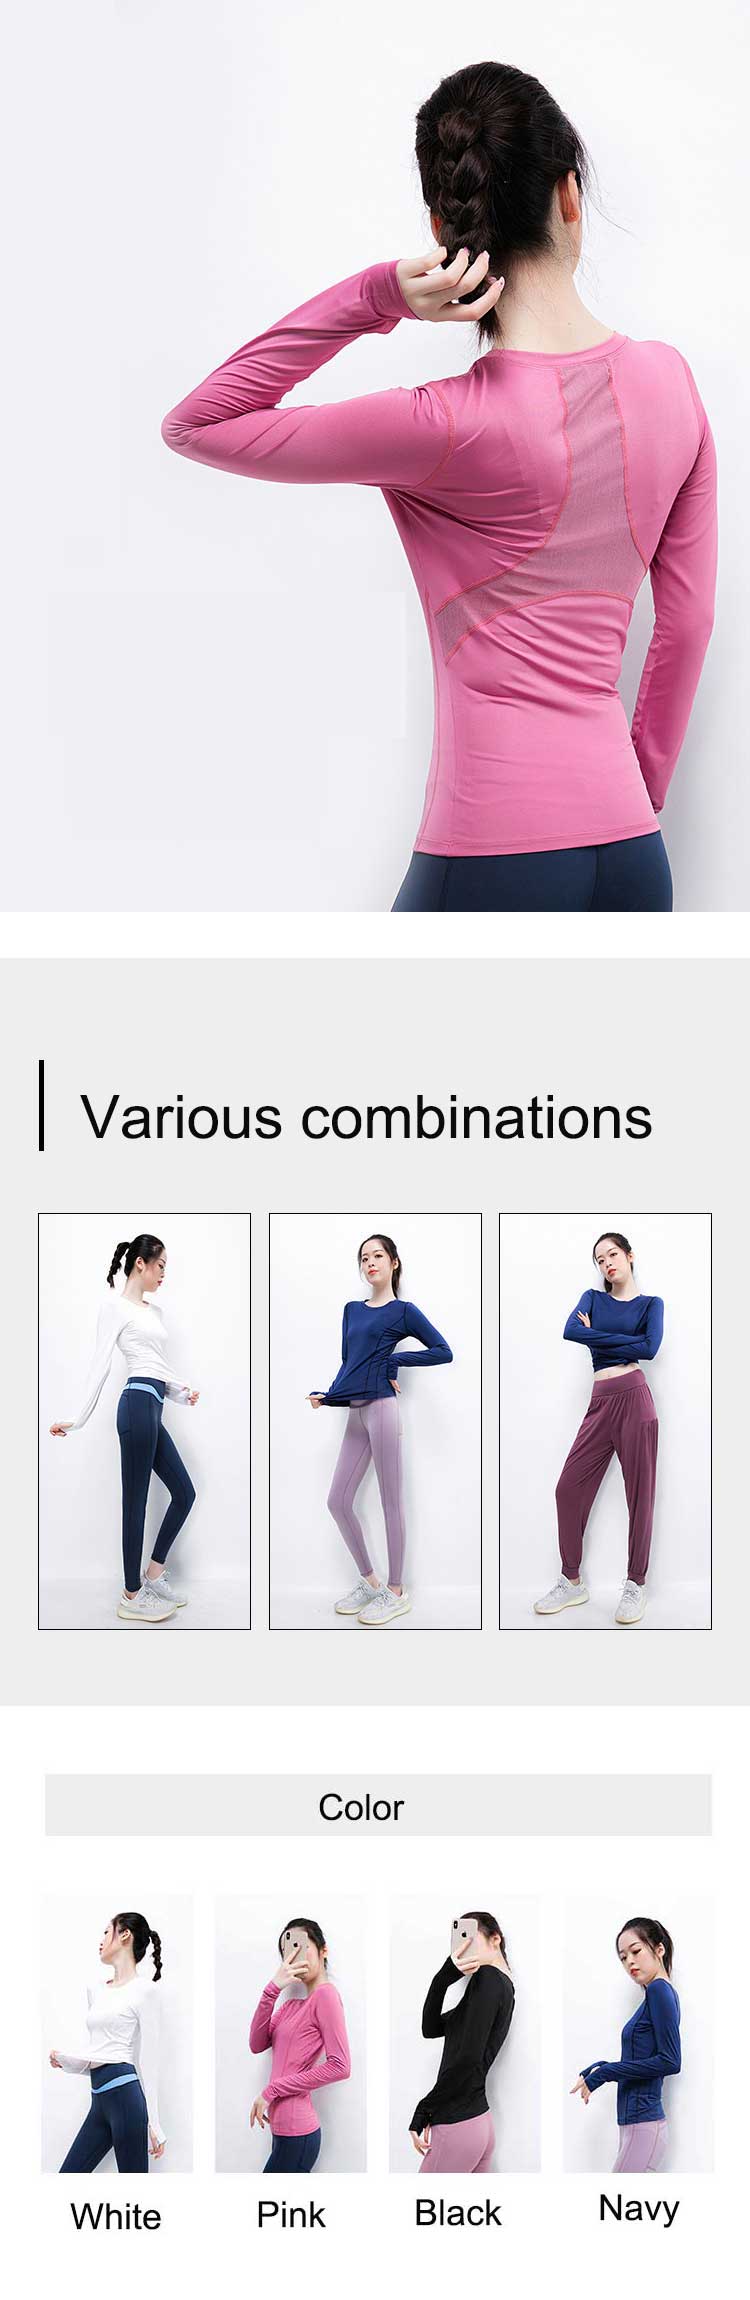 Running-shirts-women-is-designed-for-sports,-the-fabric-is-light-and-elastic